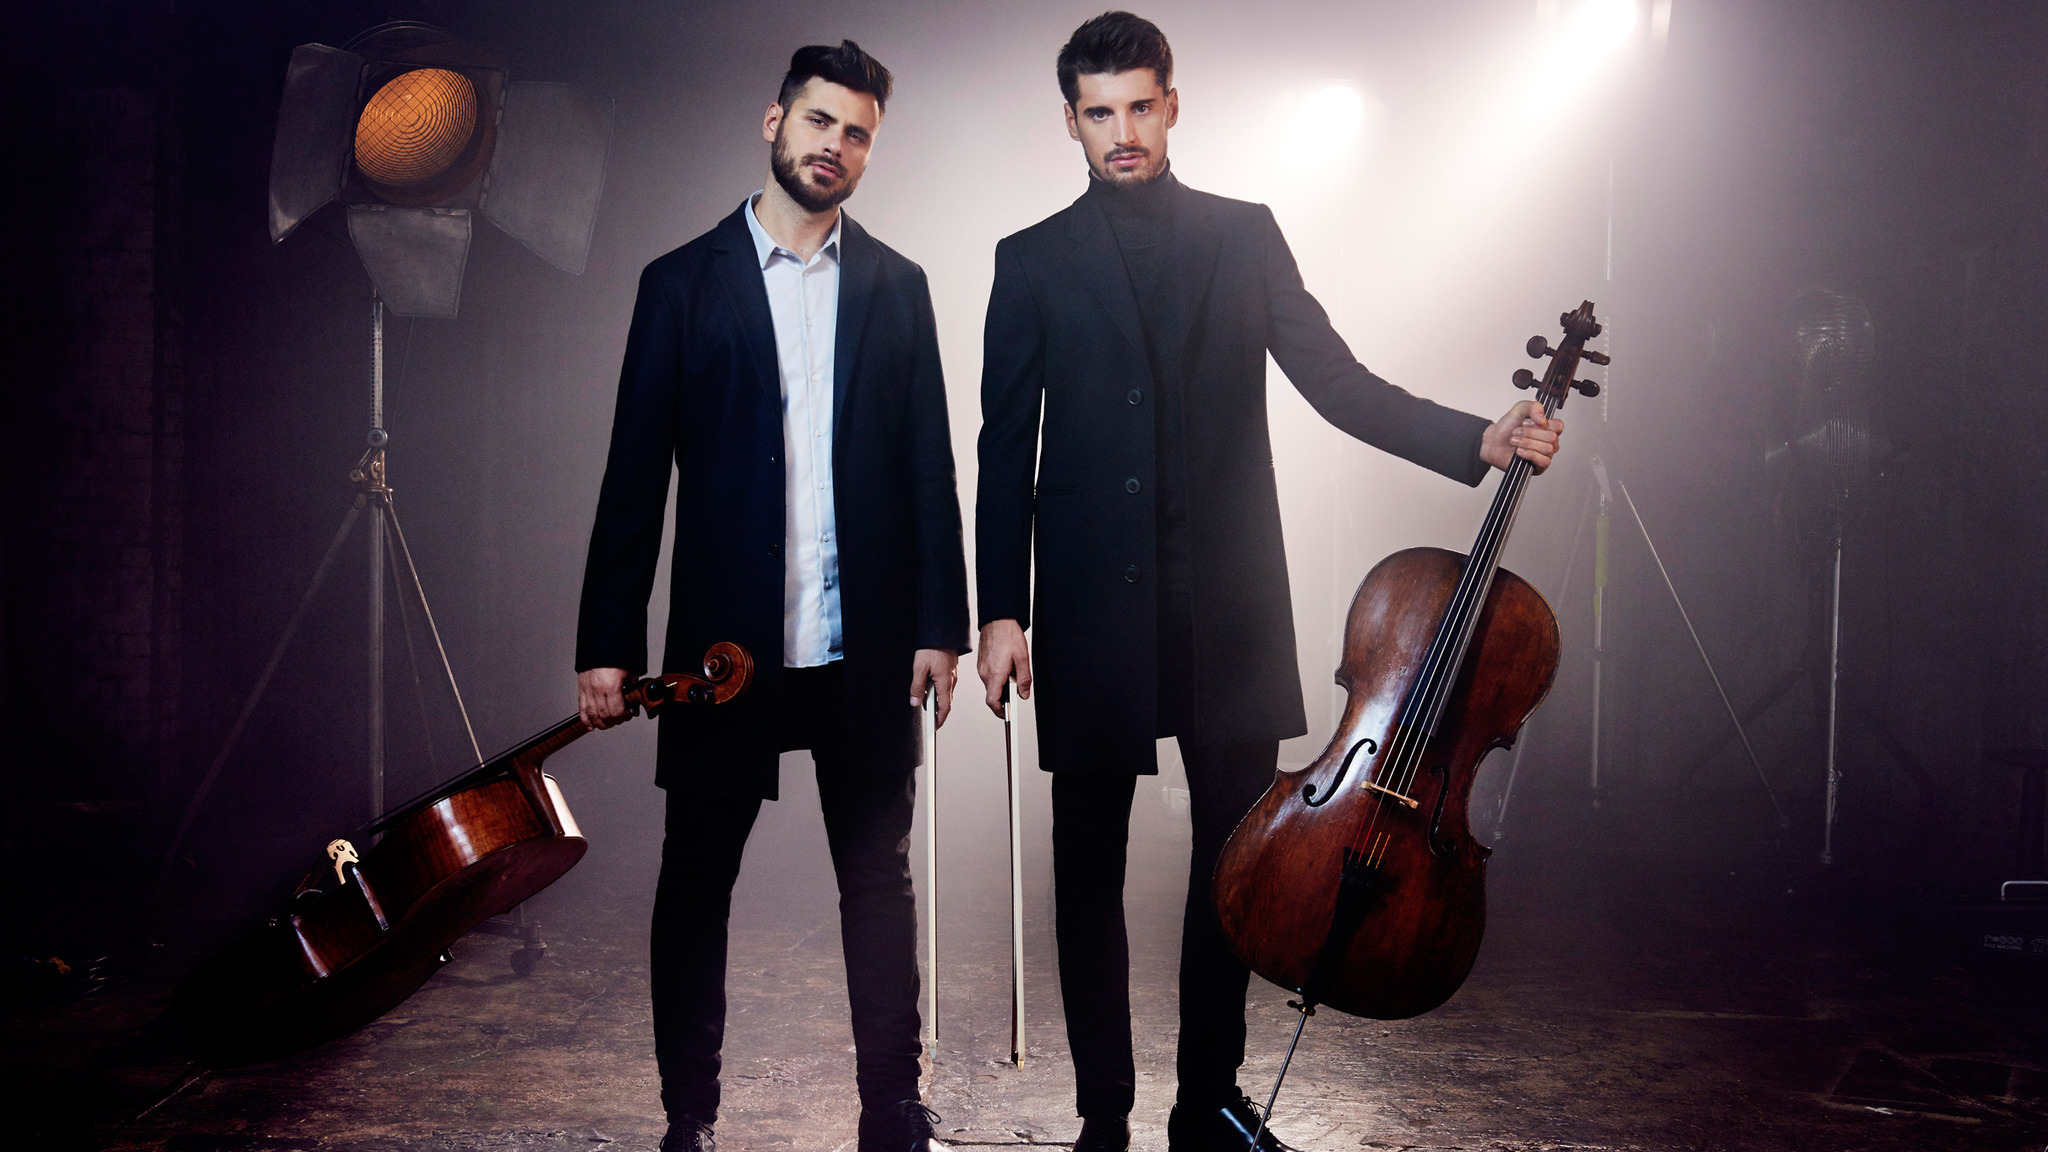 2CELLOS Tour Dates, New Music, and More | Zumic